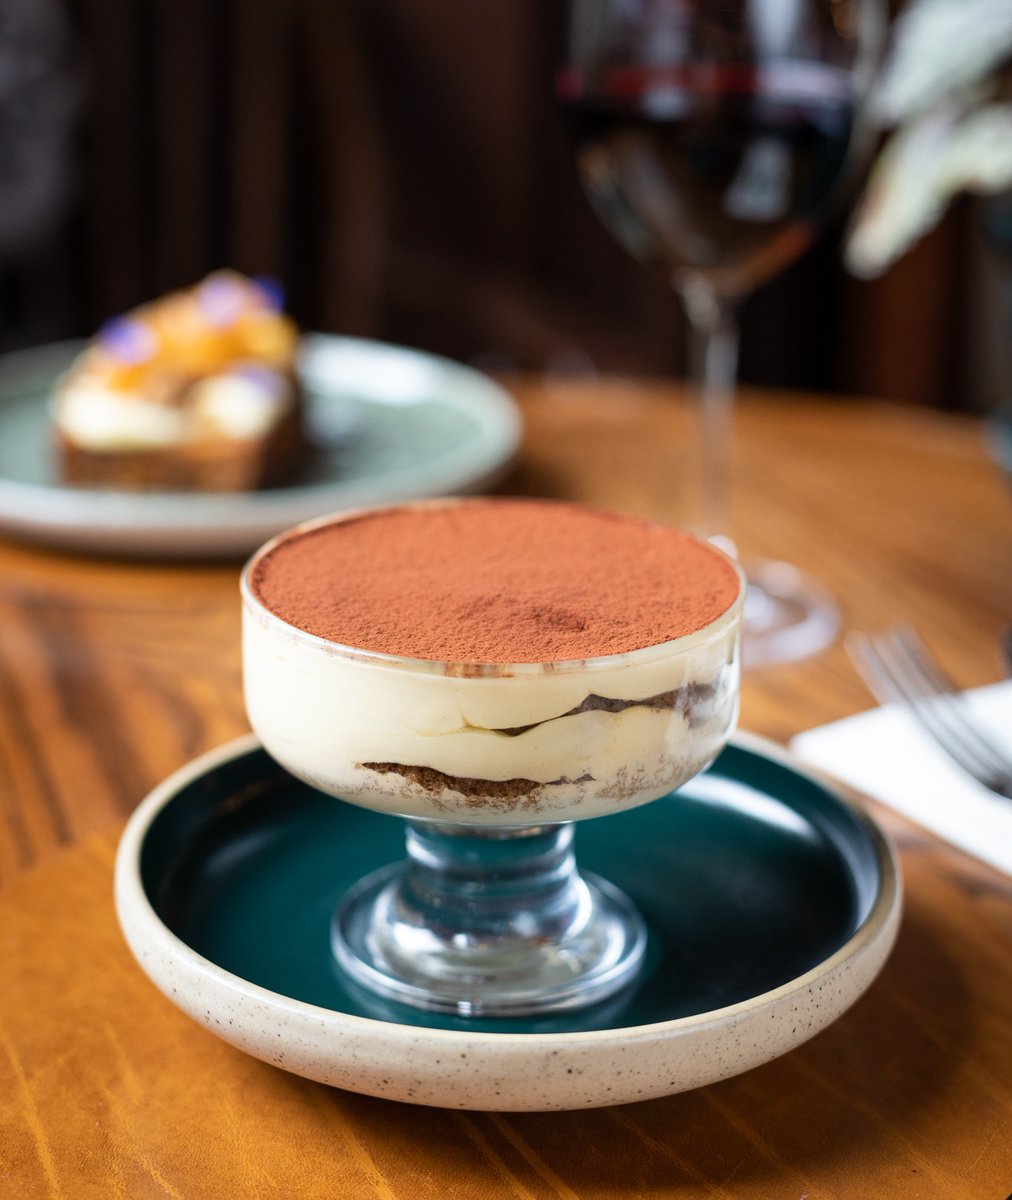 A Sunday lunch in The Fisherman's Pub is never complete without something sweet. The tiramisu is one of our favourites. Let us know yours in the comments below. ⬇️ #relaischateaux #connemara #ireland